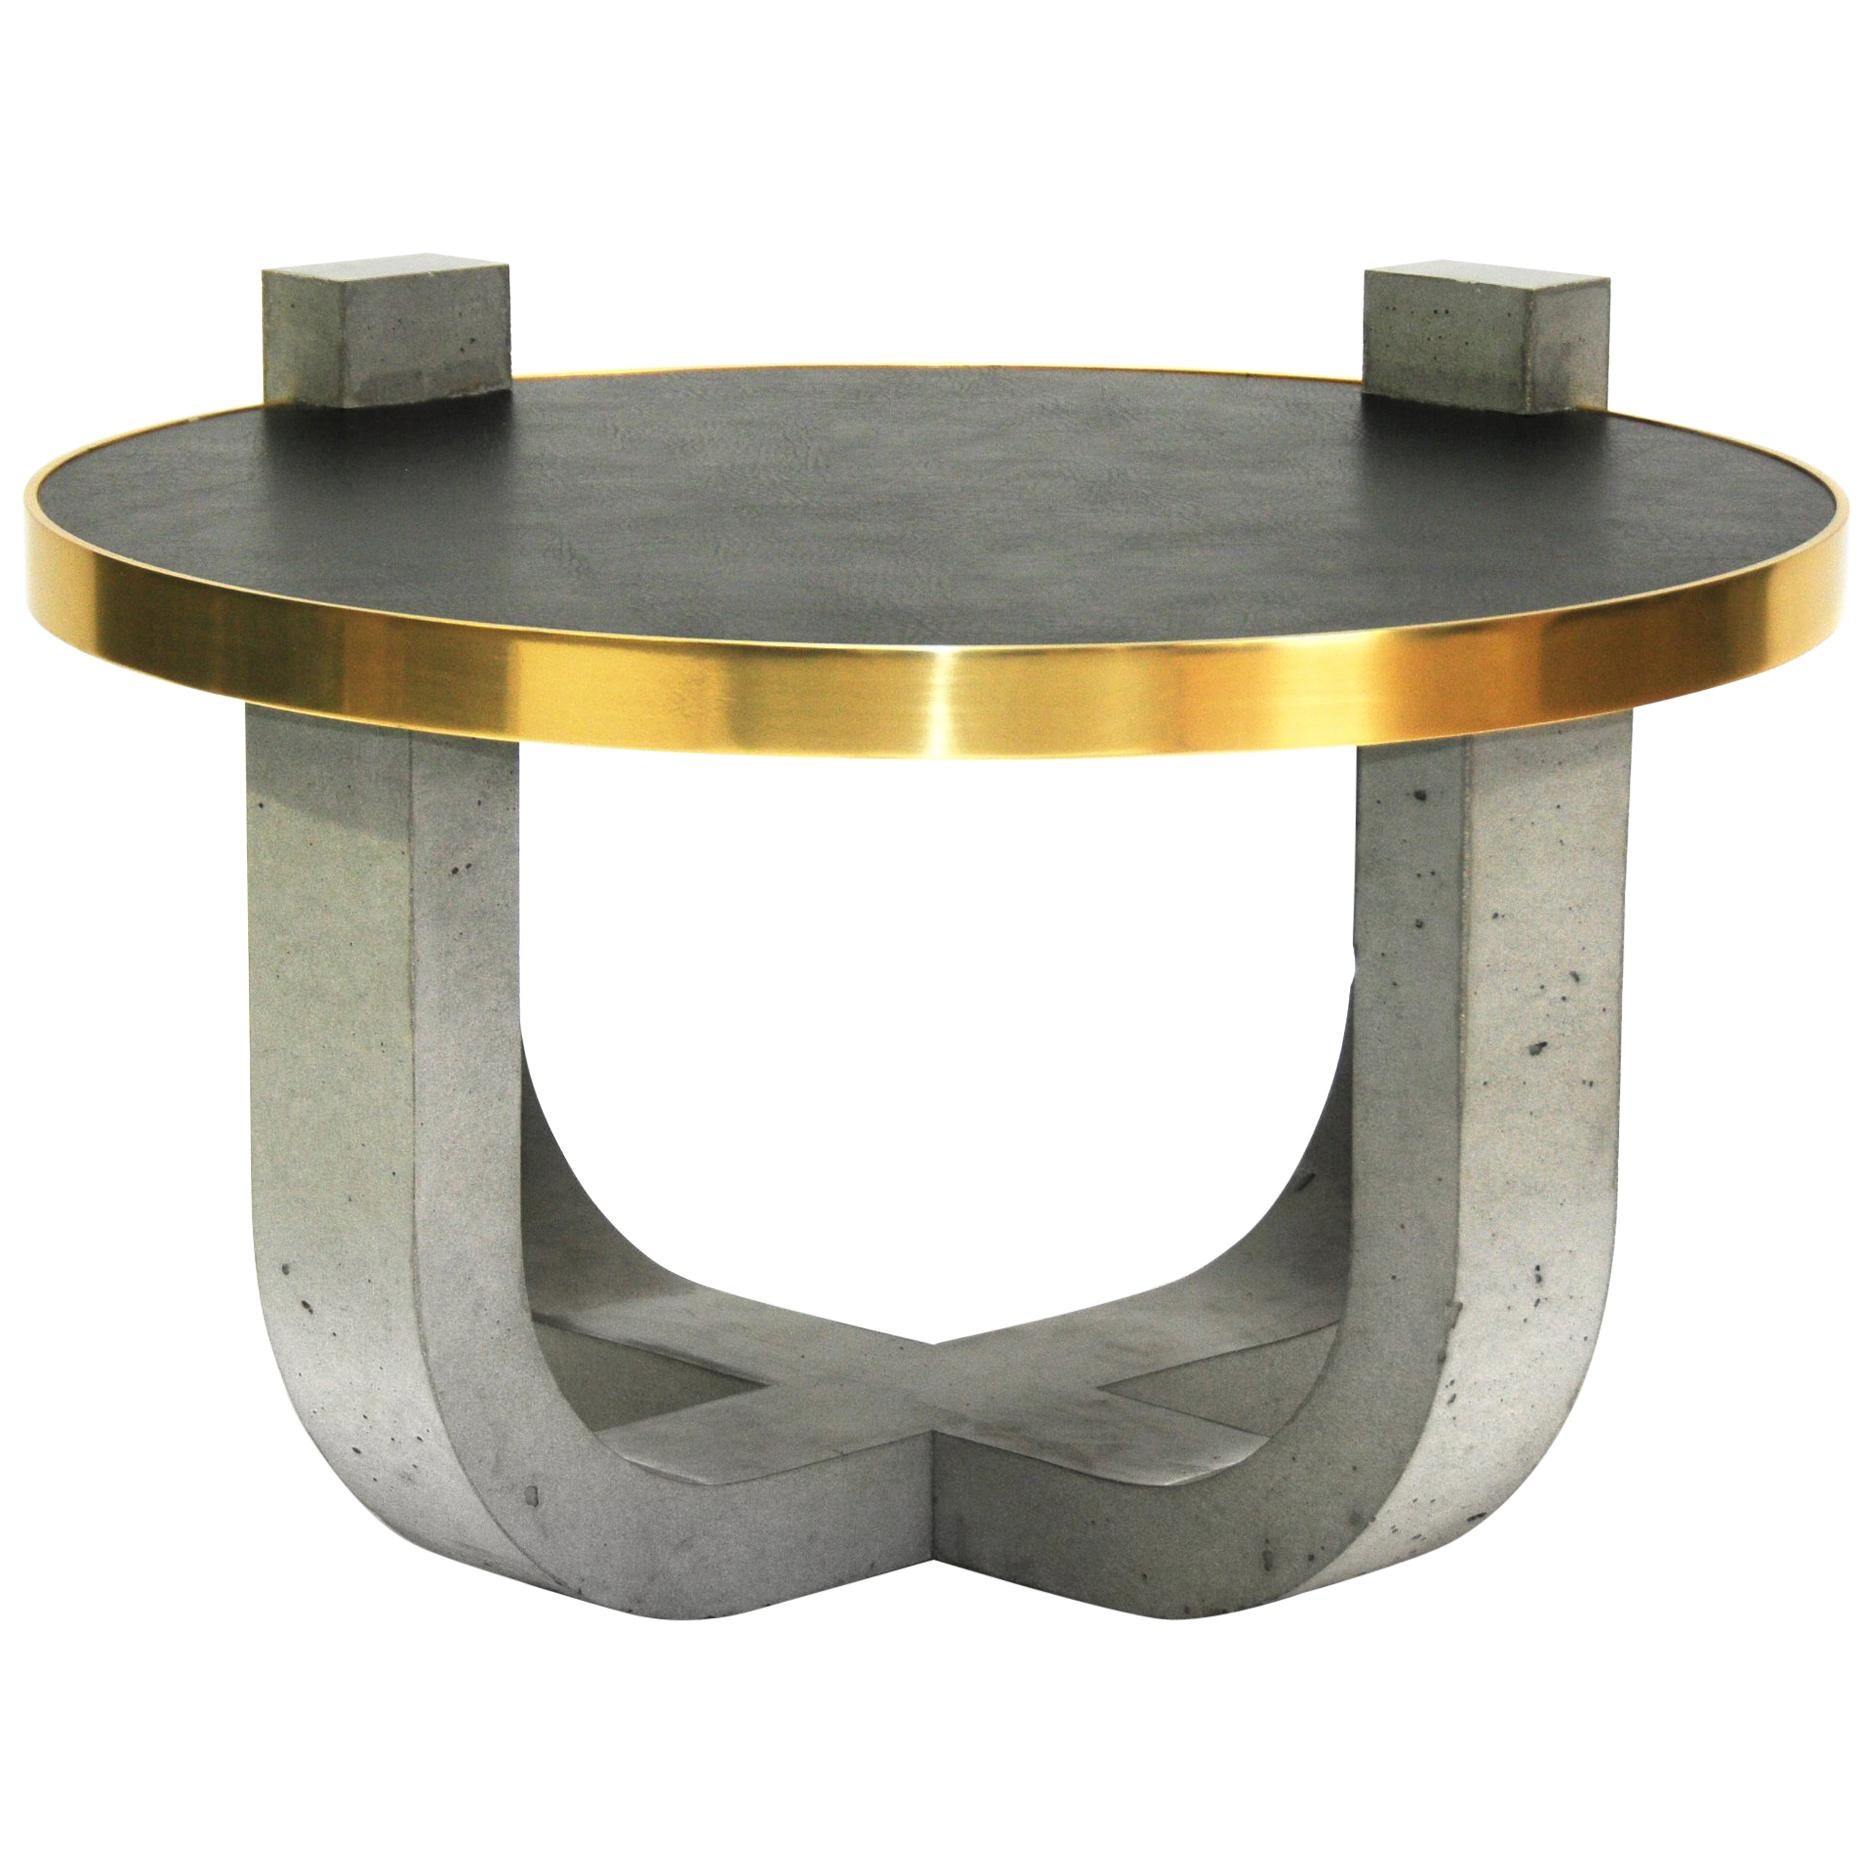 Minimalist Modern Concrete Leather-top Round Coffee Table with Brass Detail